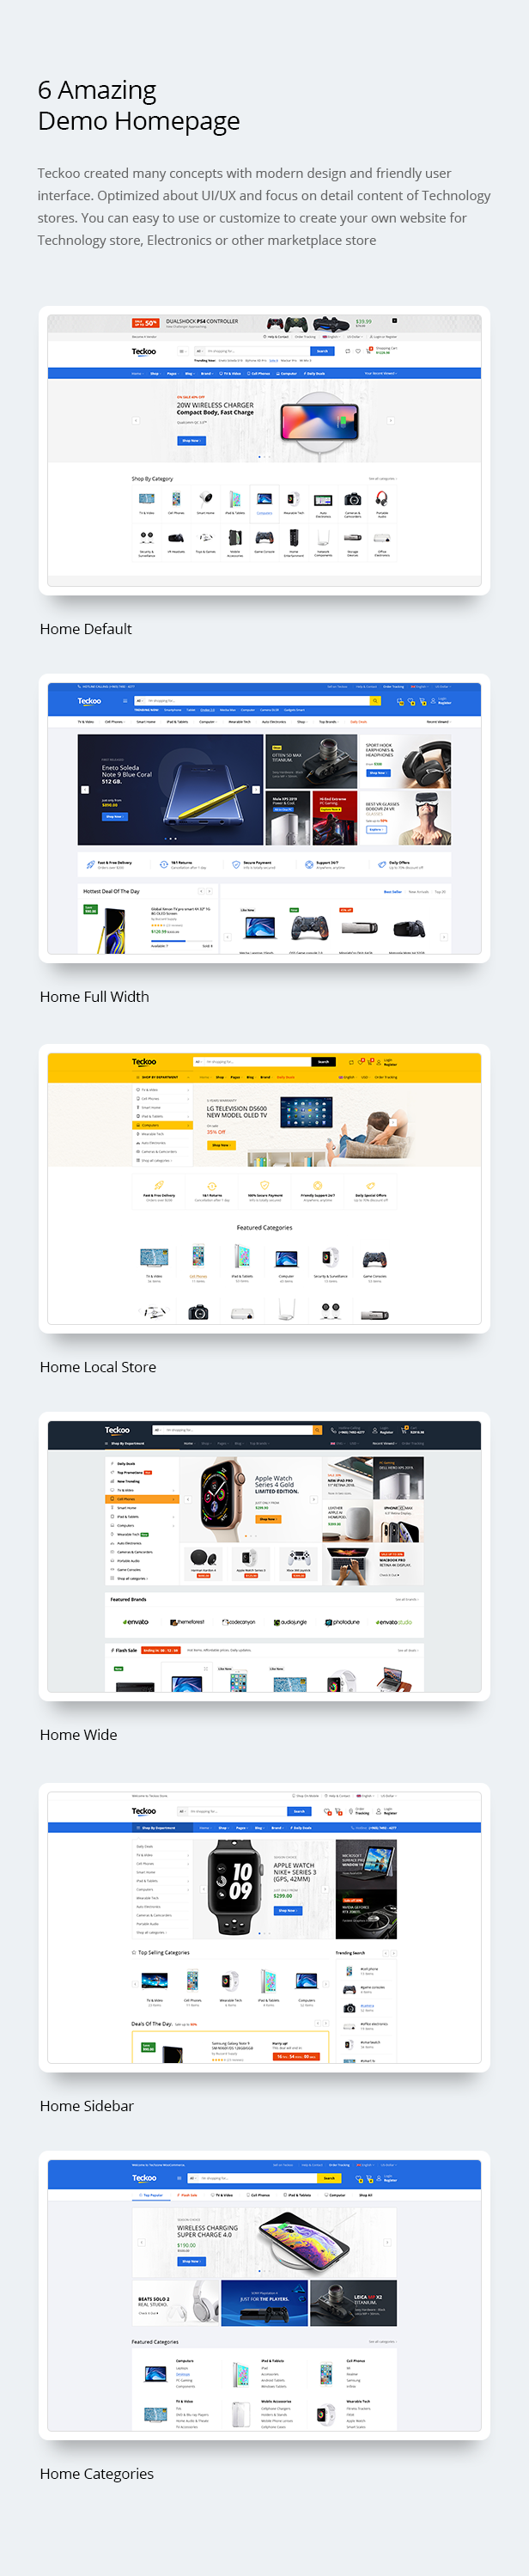 Teckoo - Electronic & Technology Marketplace eCommerce PSD Template - 5